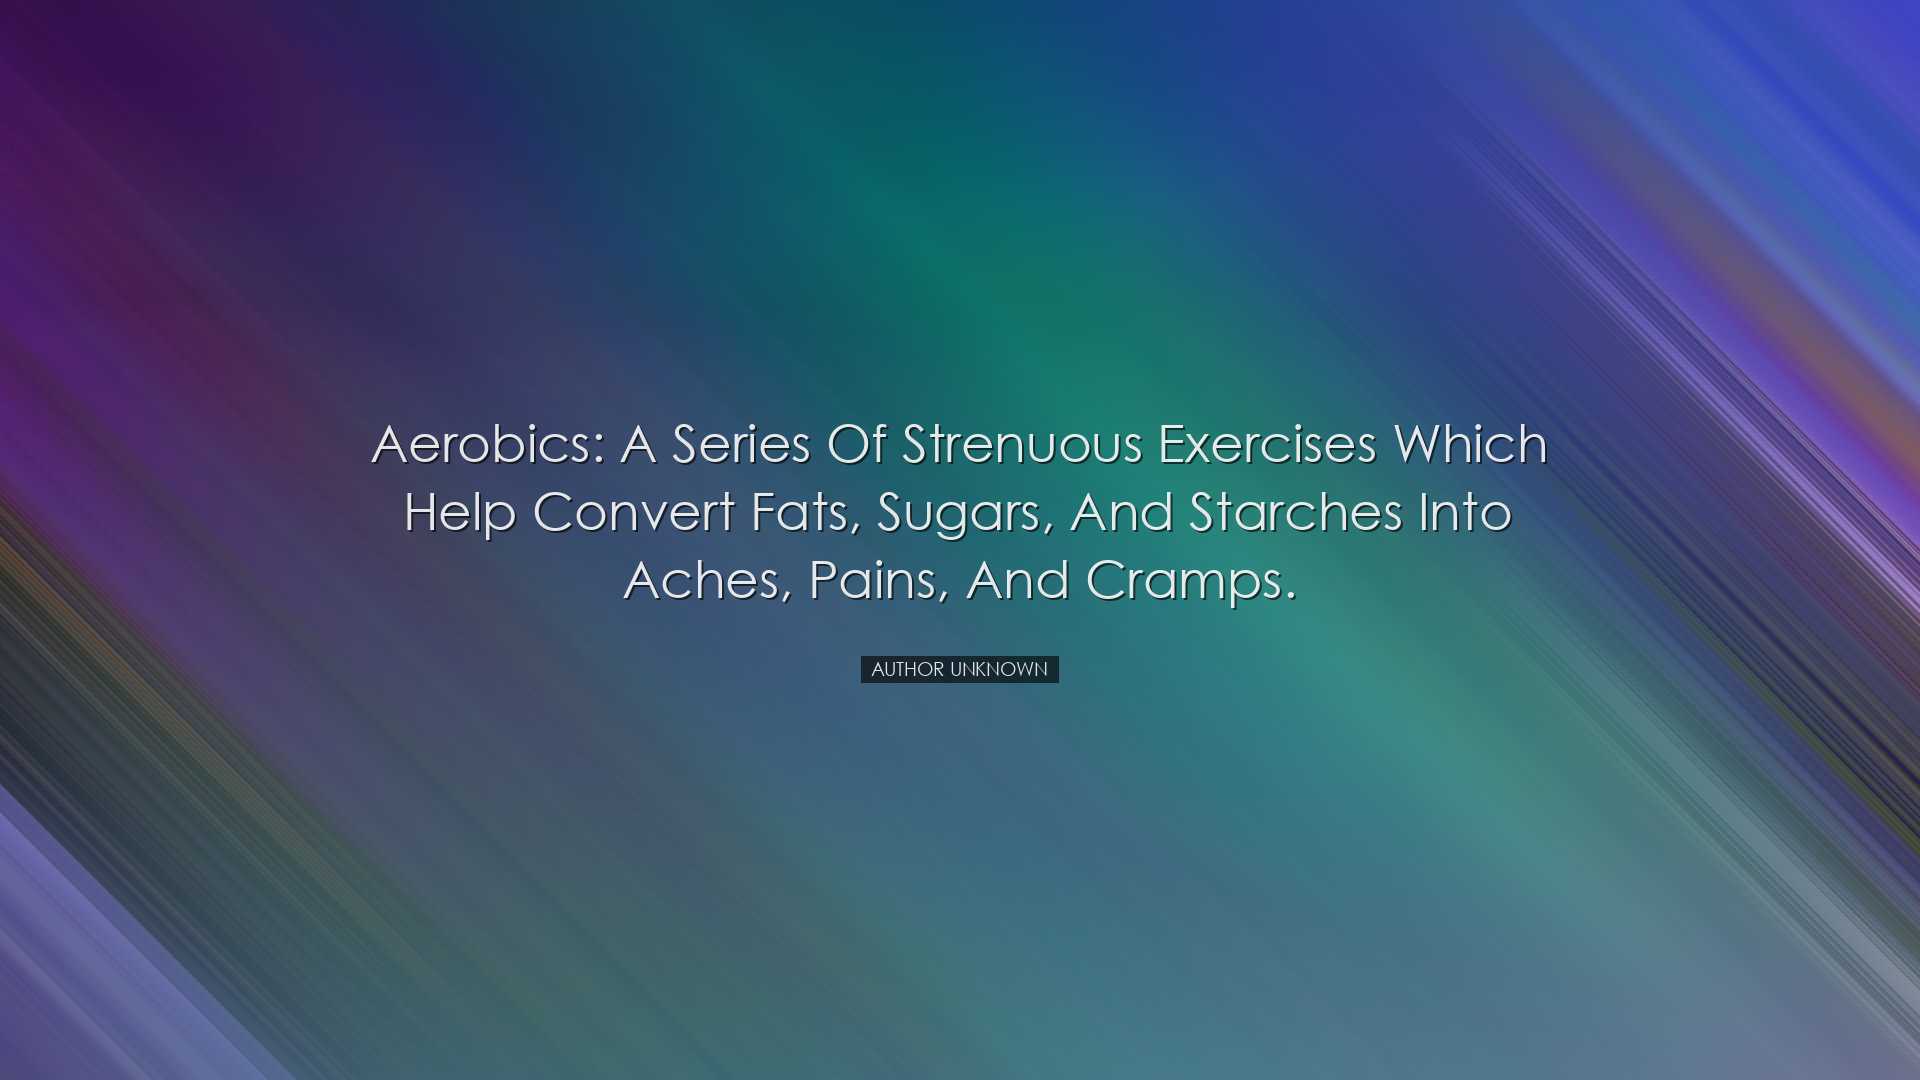 Aerobics: a series of strenuous exercises which help convert fats,